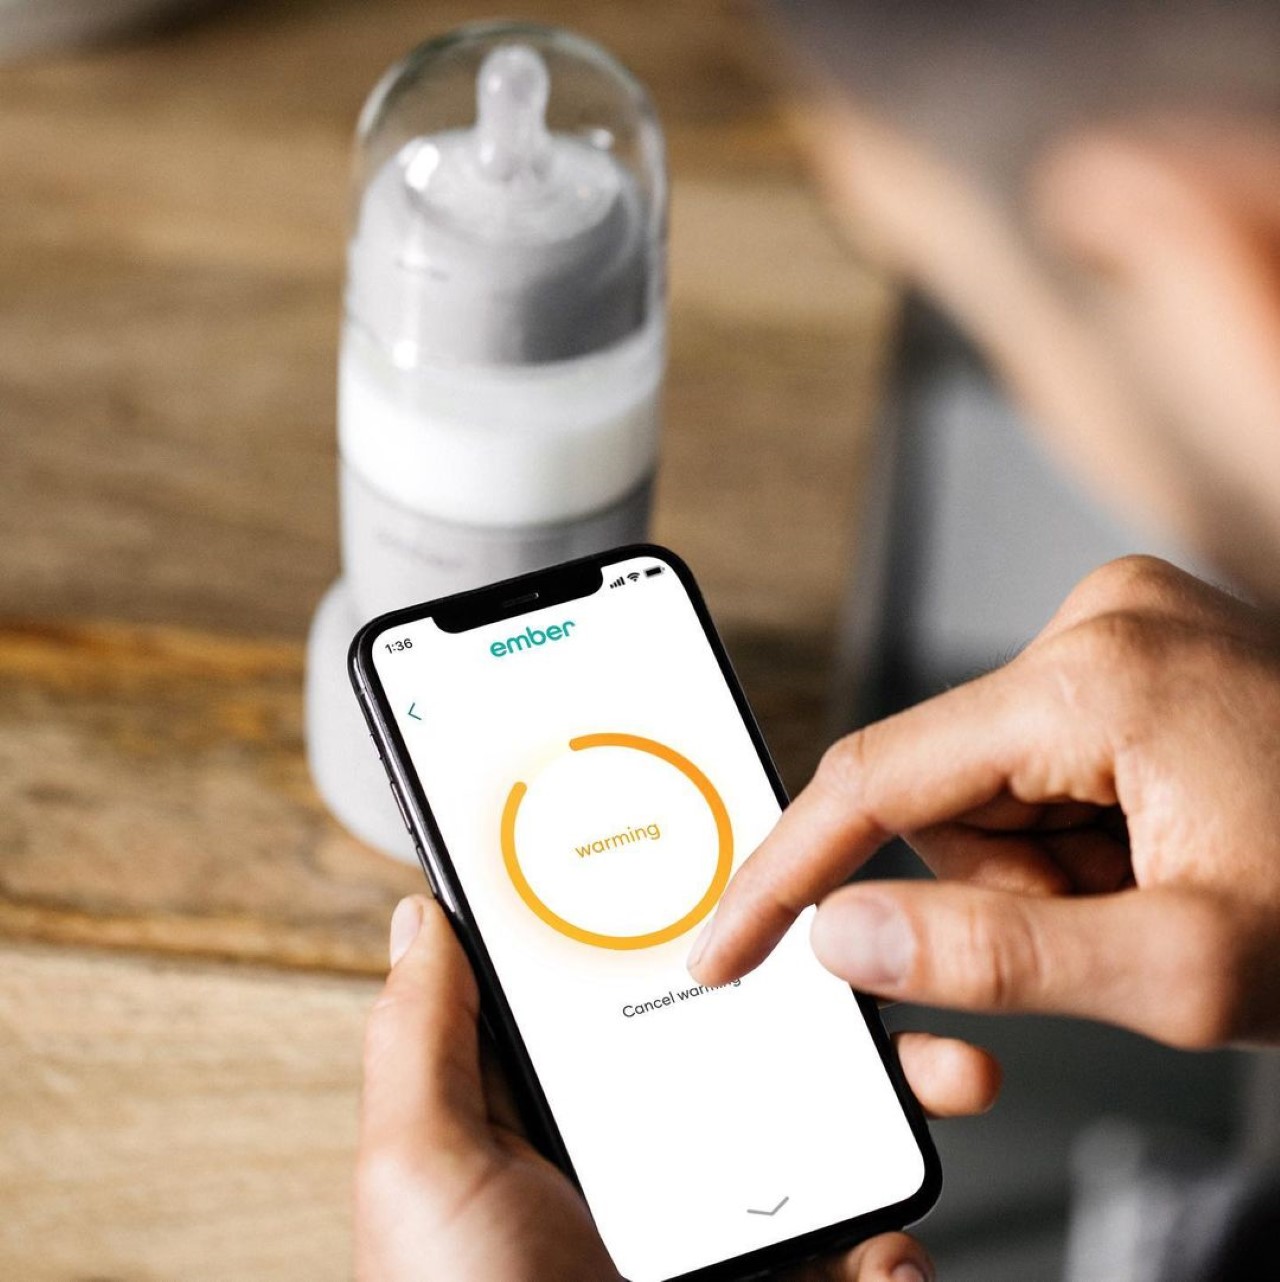 Ember’s new self-warming baby bottle keeps milk or formula at a consistent temperature of 98.6°F